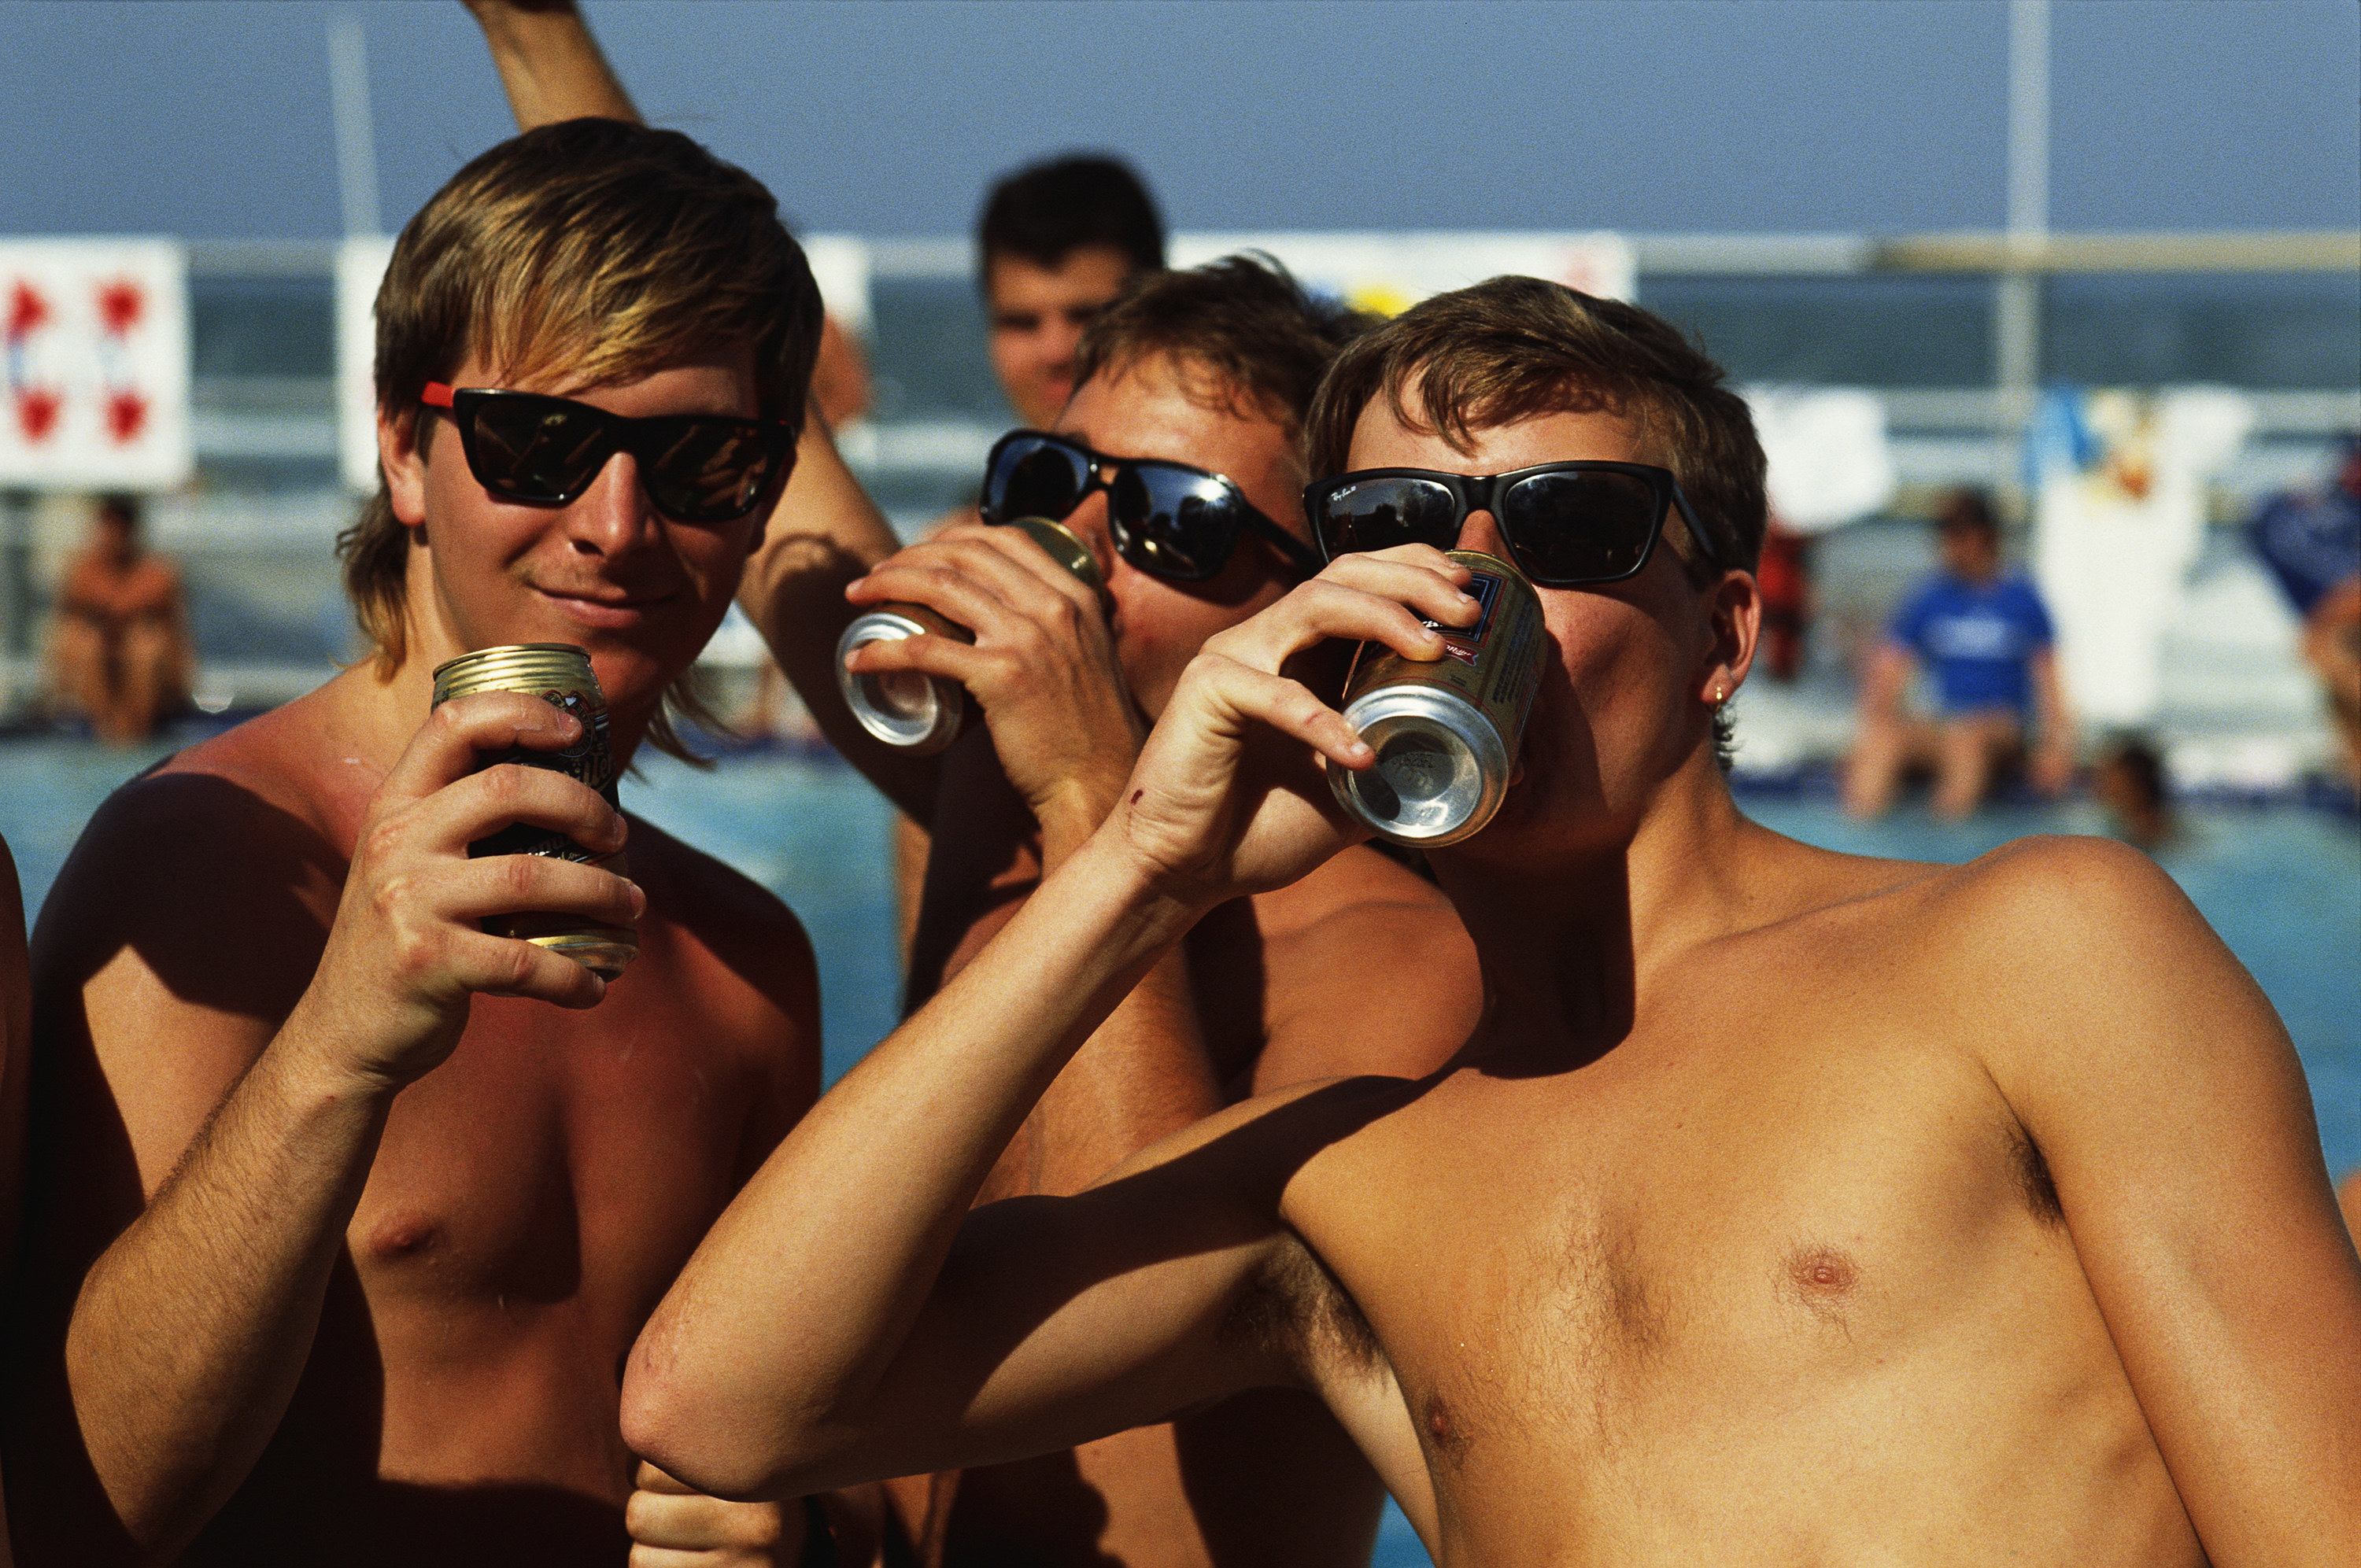 three young men in sunglasses and with no shirts drink beer in front of a pool